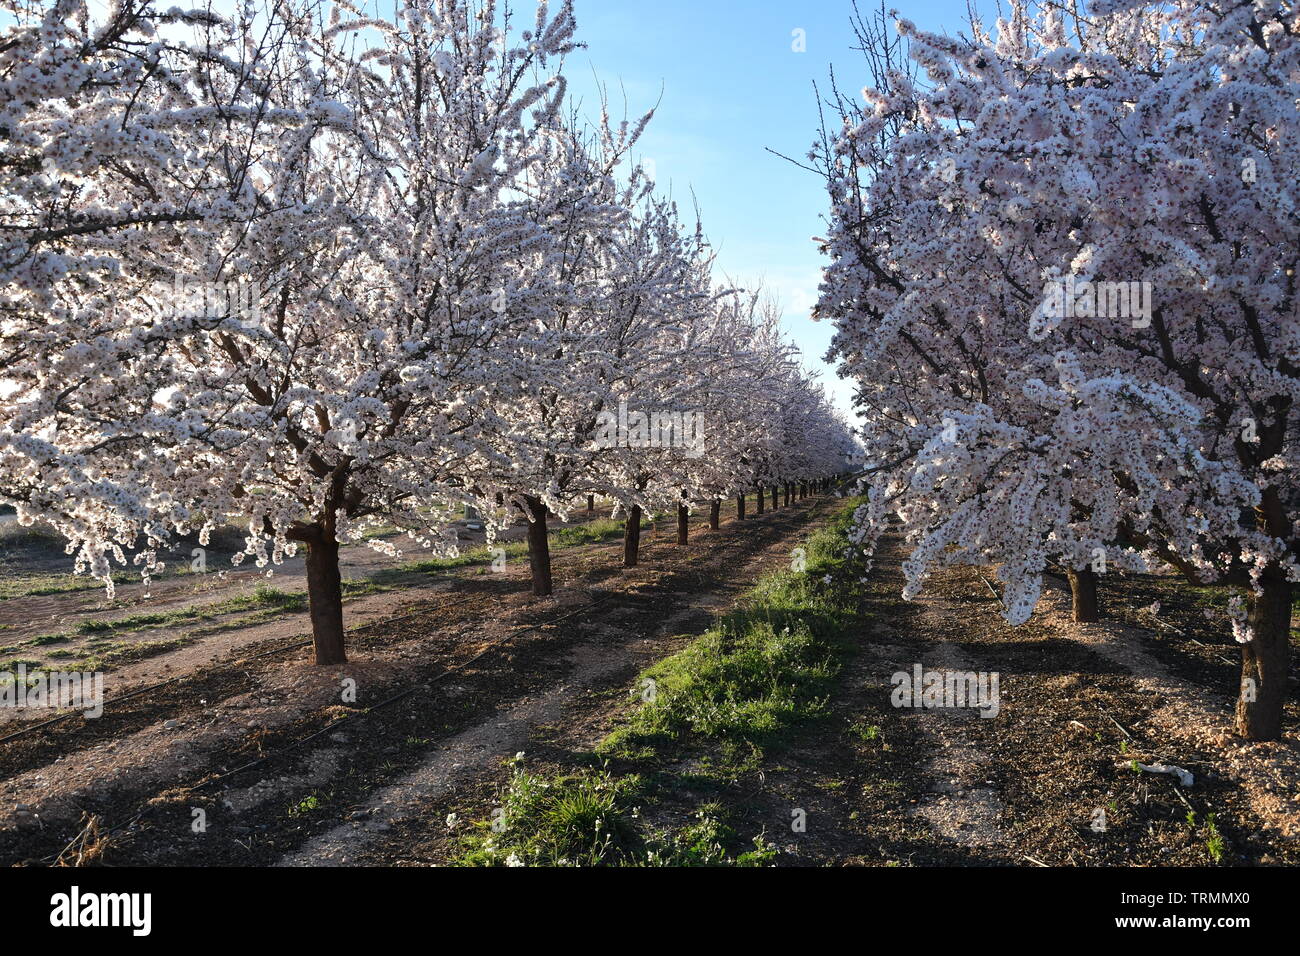 Almond trees in bloom Stock Photo